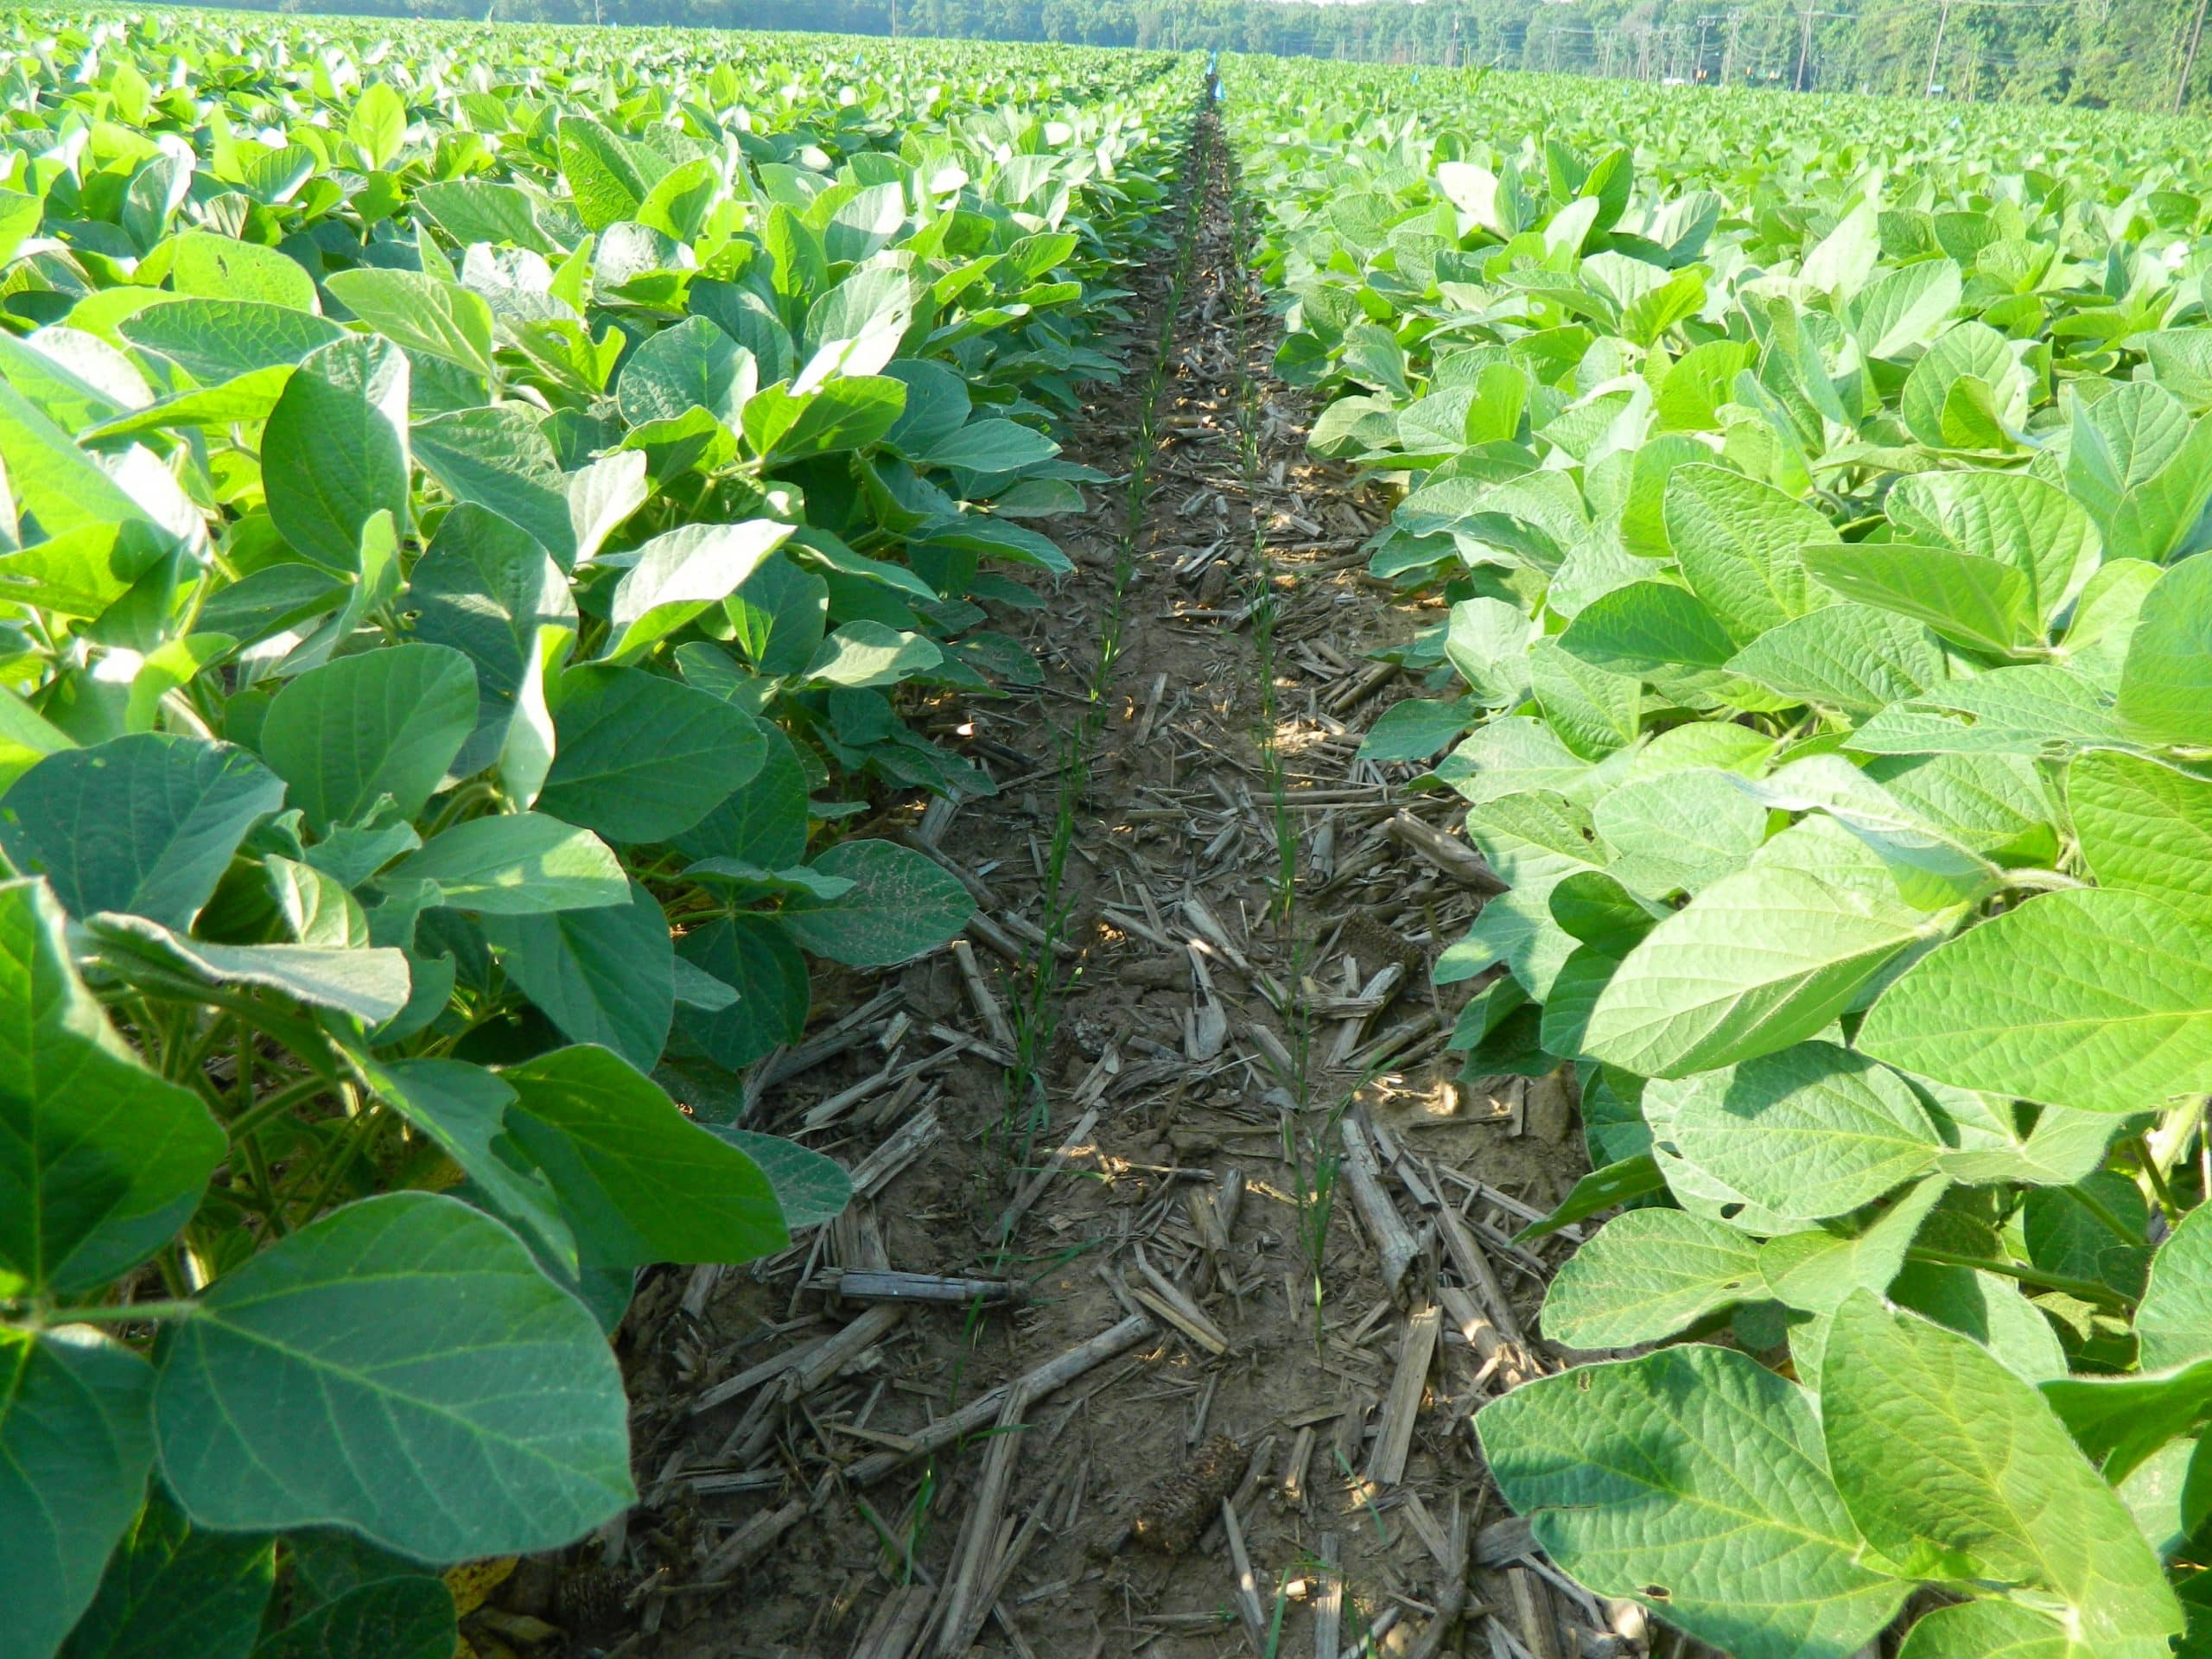 Ryegrass interseeded into soybeans. Photo credit: Mirsky lab.